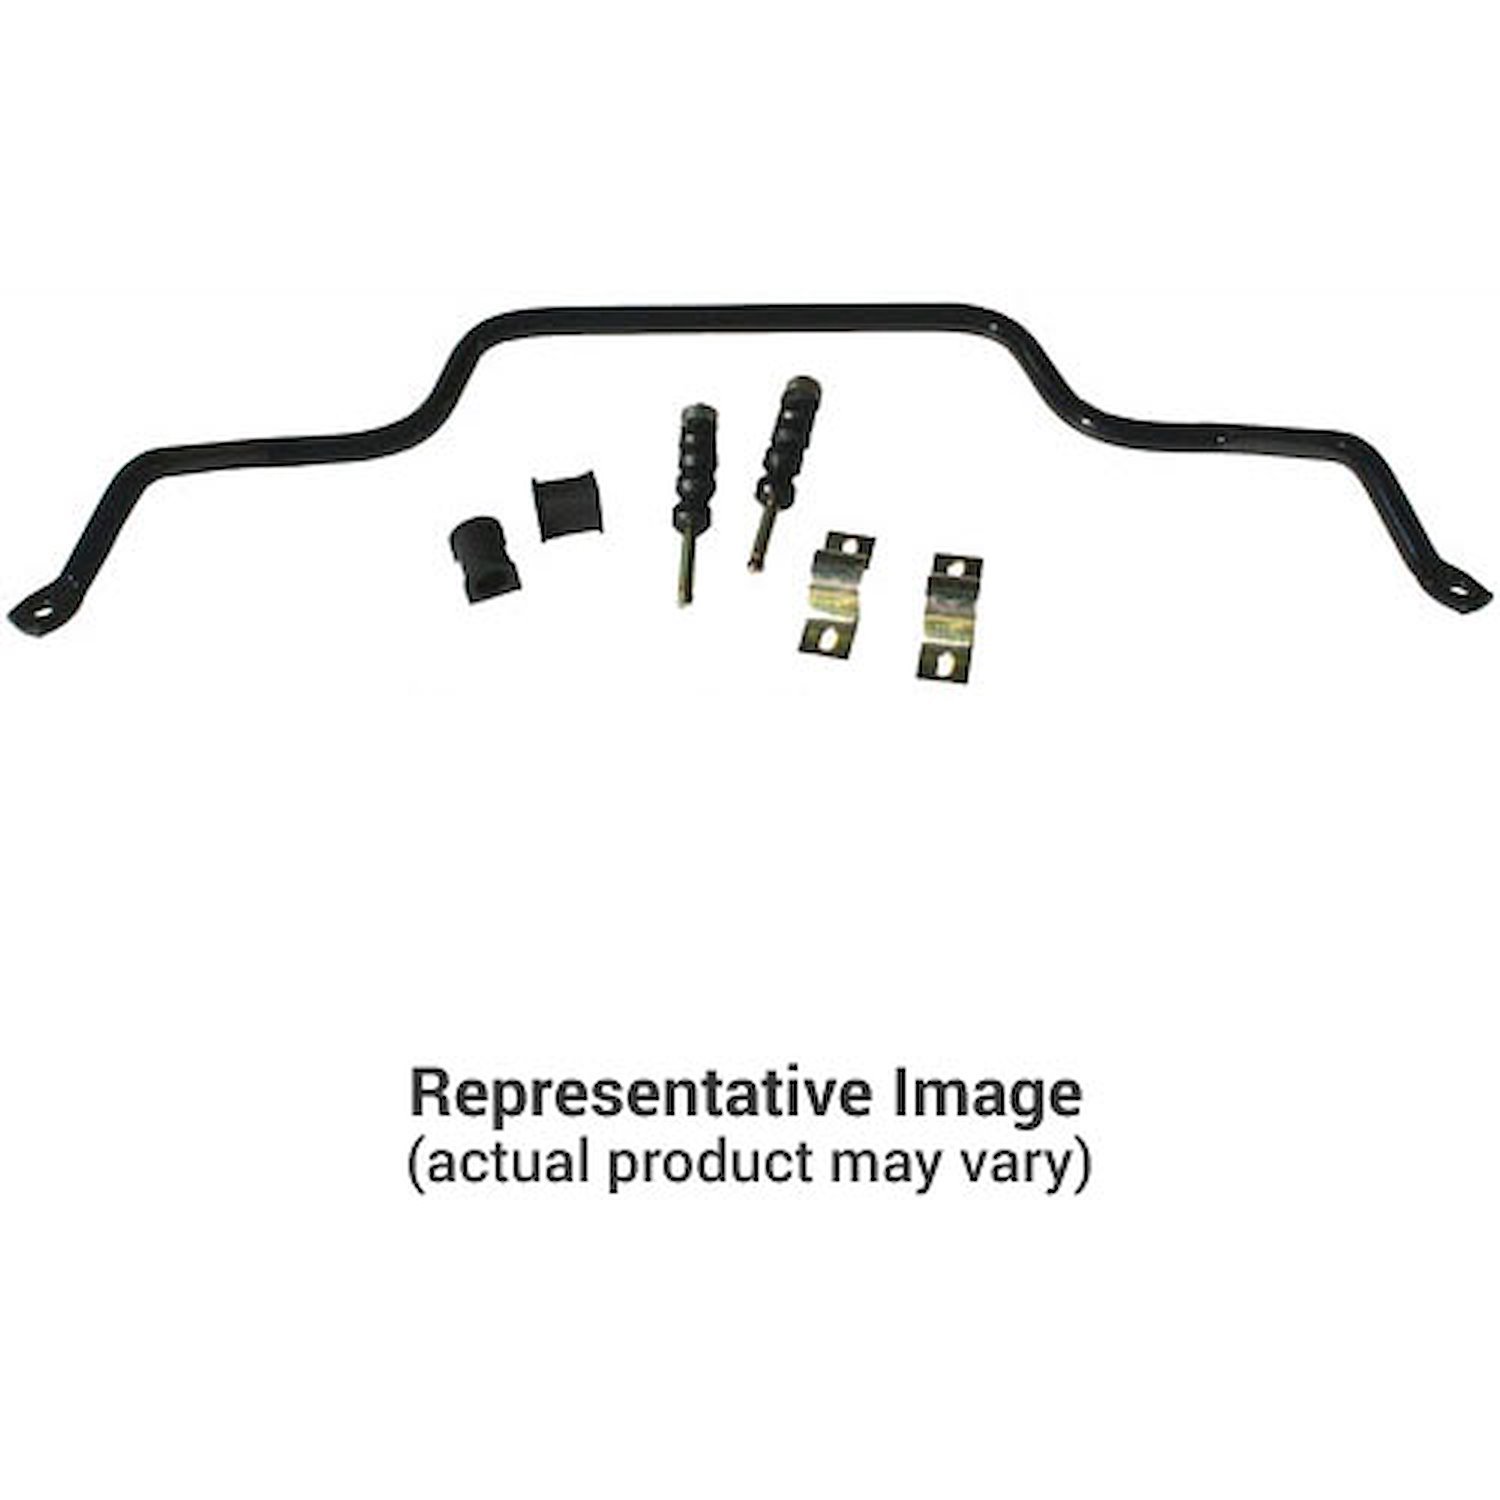 1 1/8" Front Sway Bar 1980-91 Ford F-250/F-350